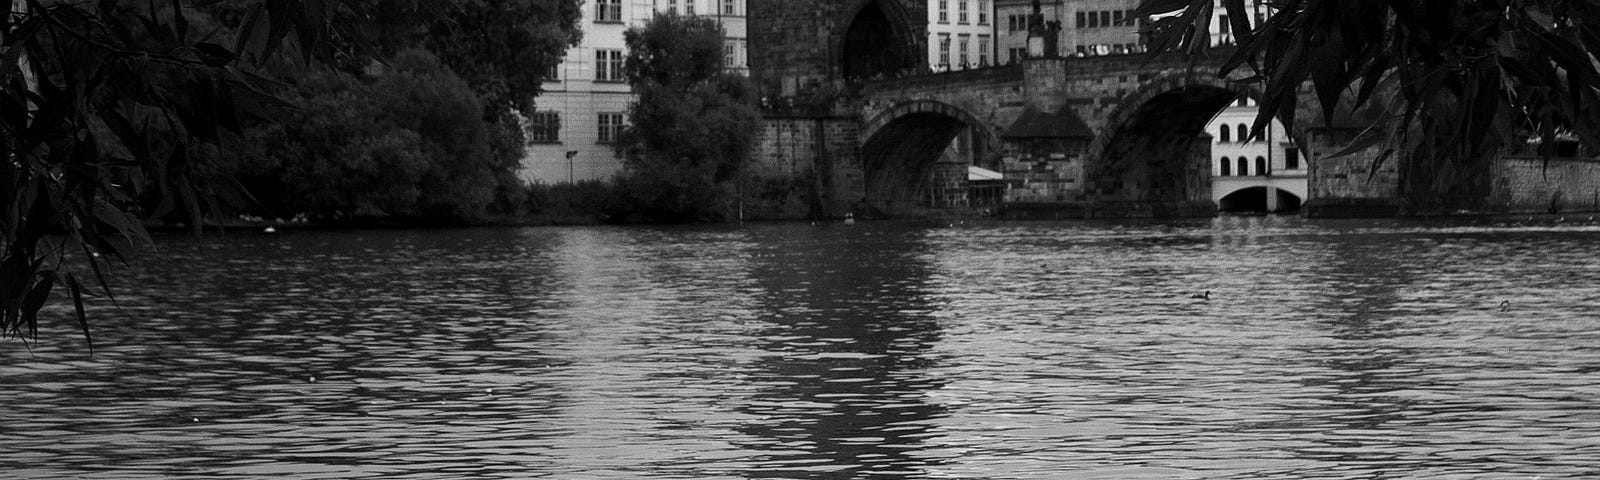 grayscale photography of mute swan on water near other swan and duck in distant of tower near buildings